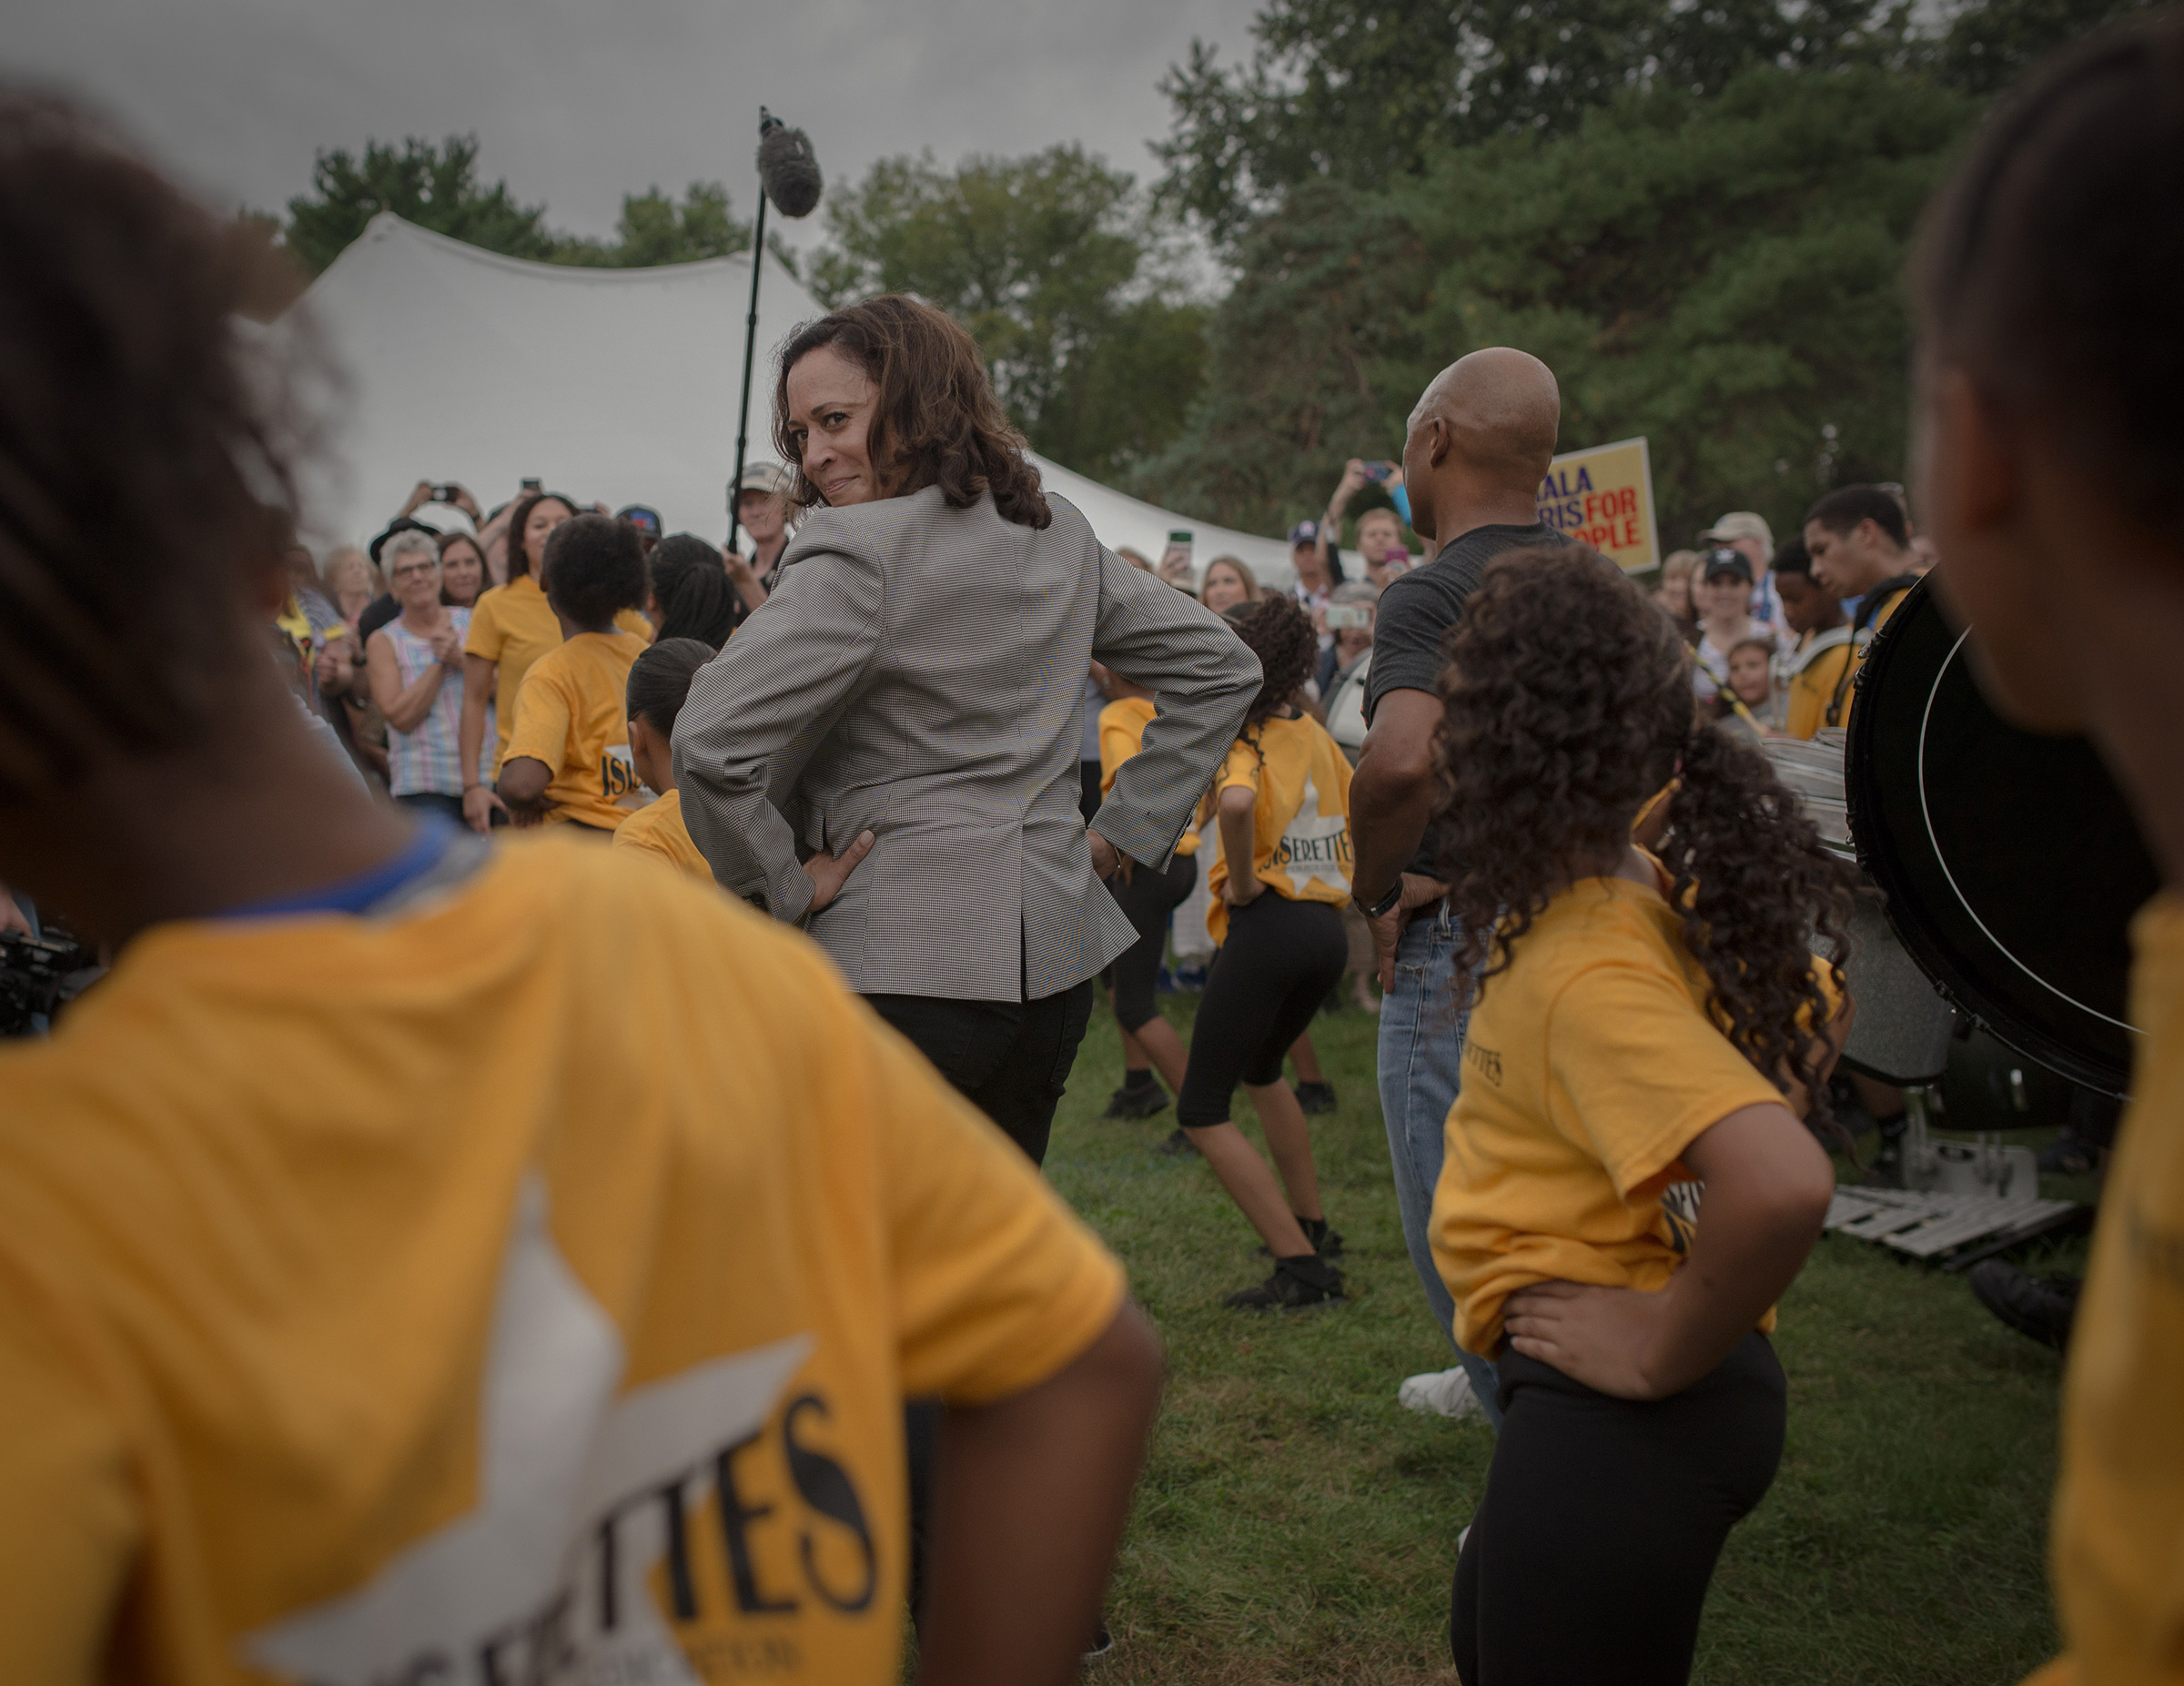 Harris takes a cue from a local drill team at the Des Moines Steakfry on Sept. 21, 2019. (September Dawn Bottoms for TIME)